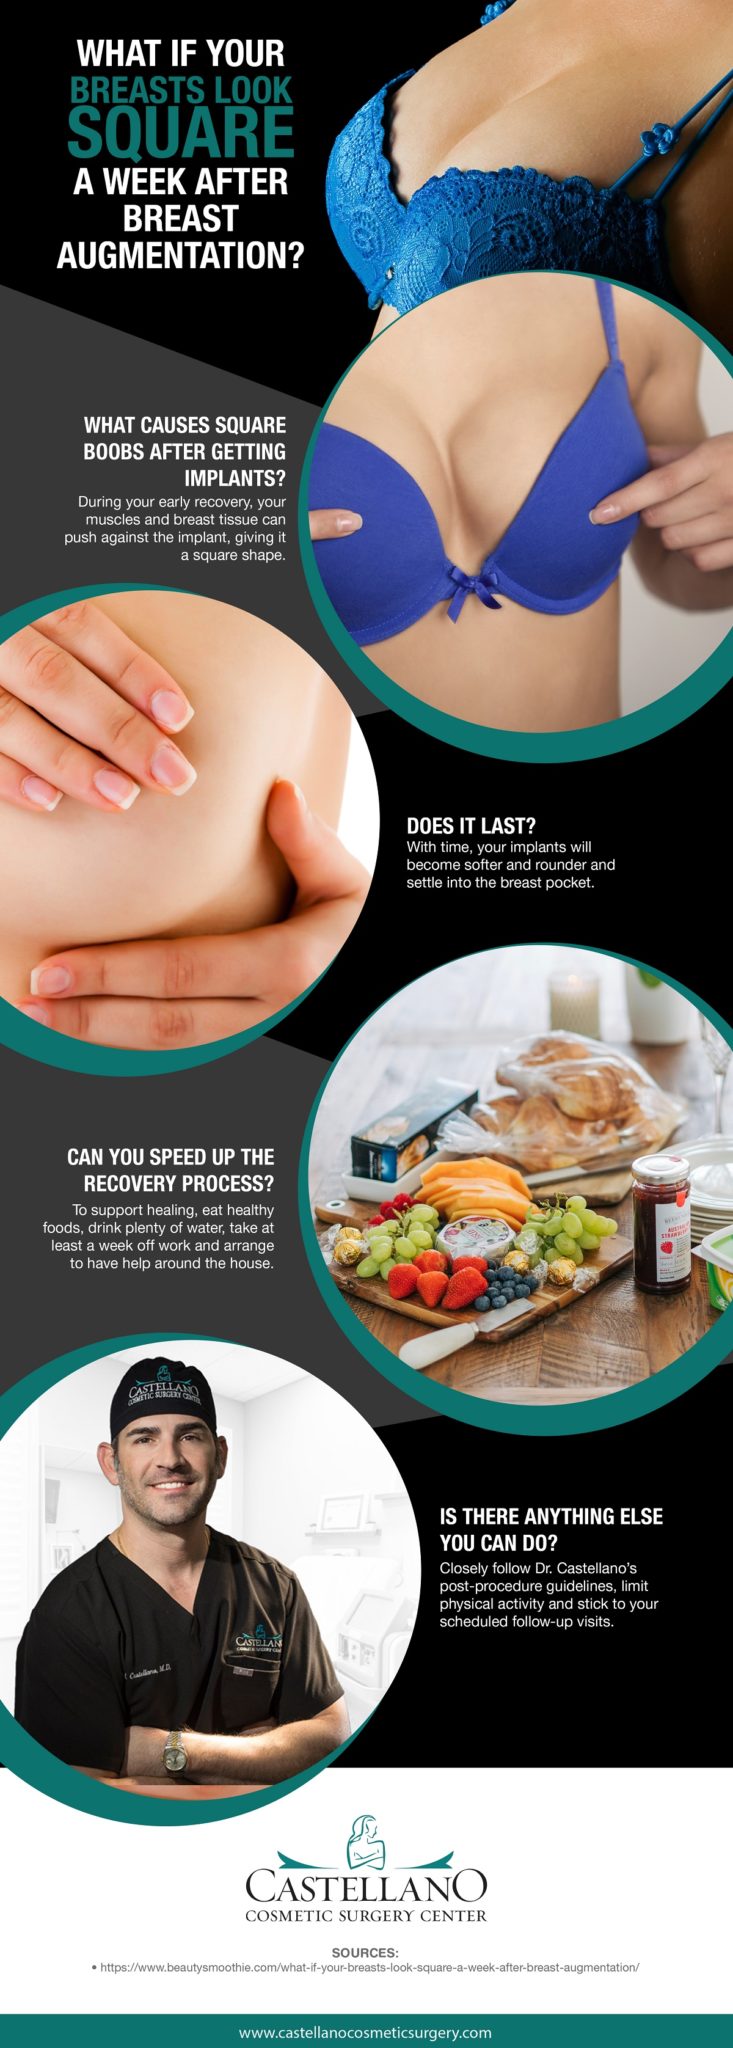 What If Your Breasts Look Square A Week After Breast Augmentation [Infographic] img 1